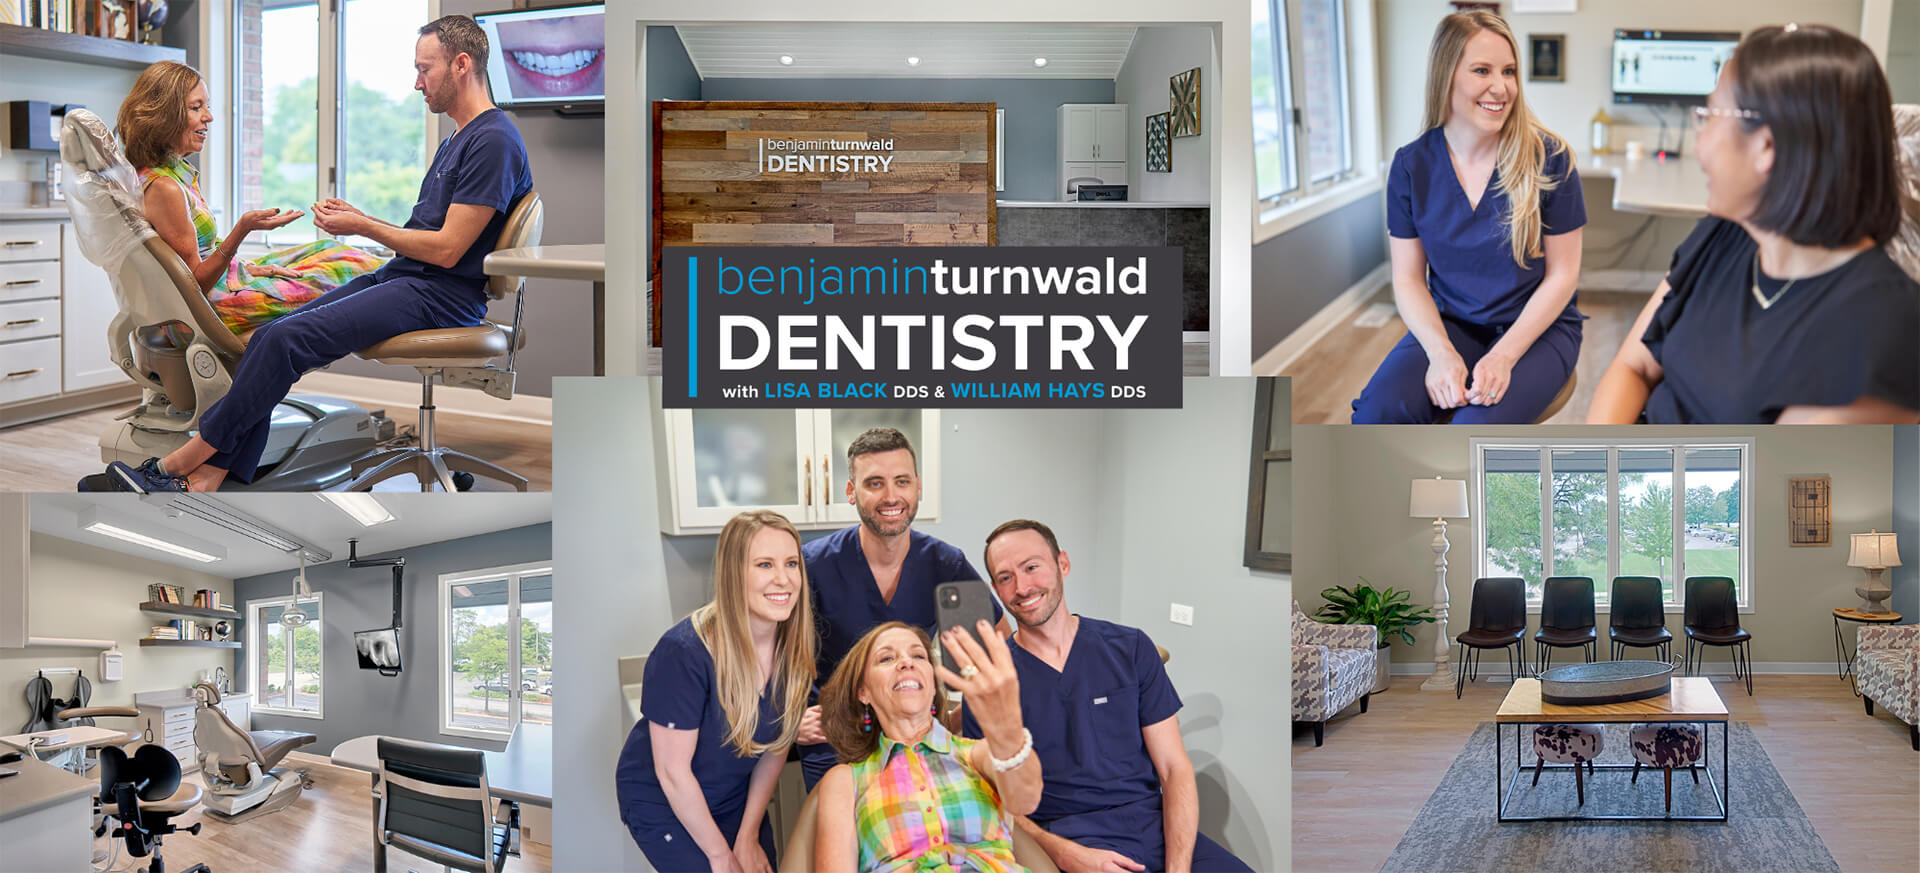 A collage of our dental office services